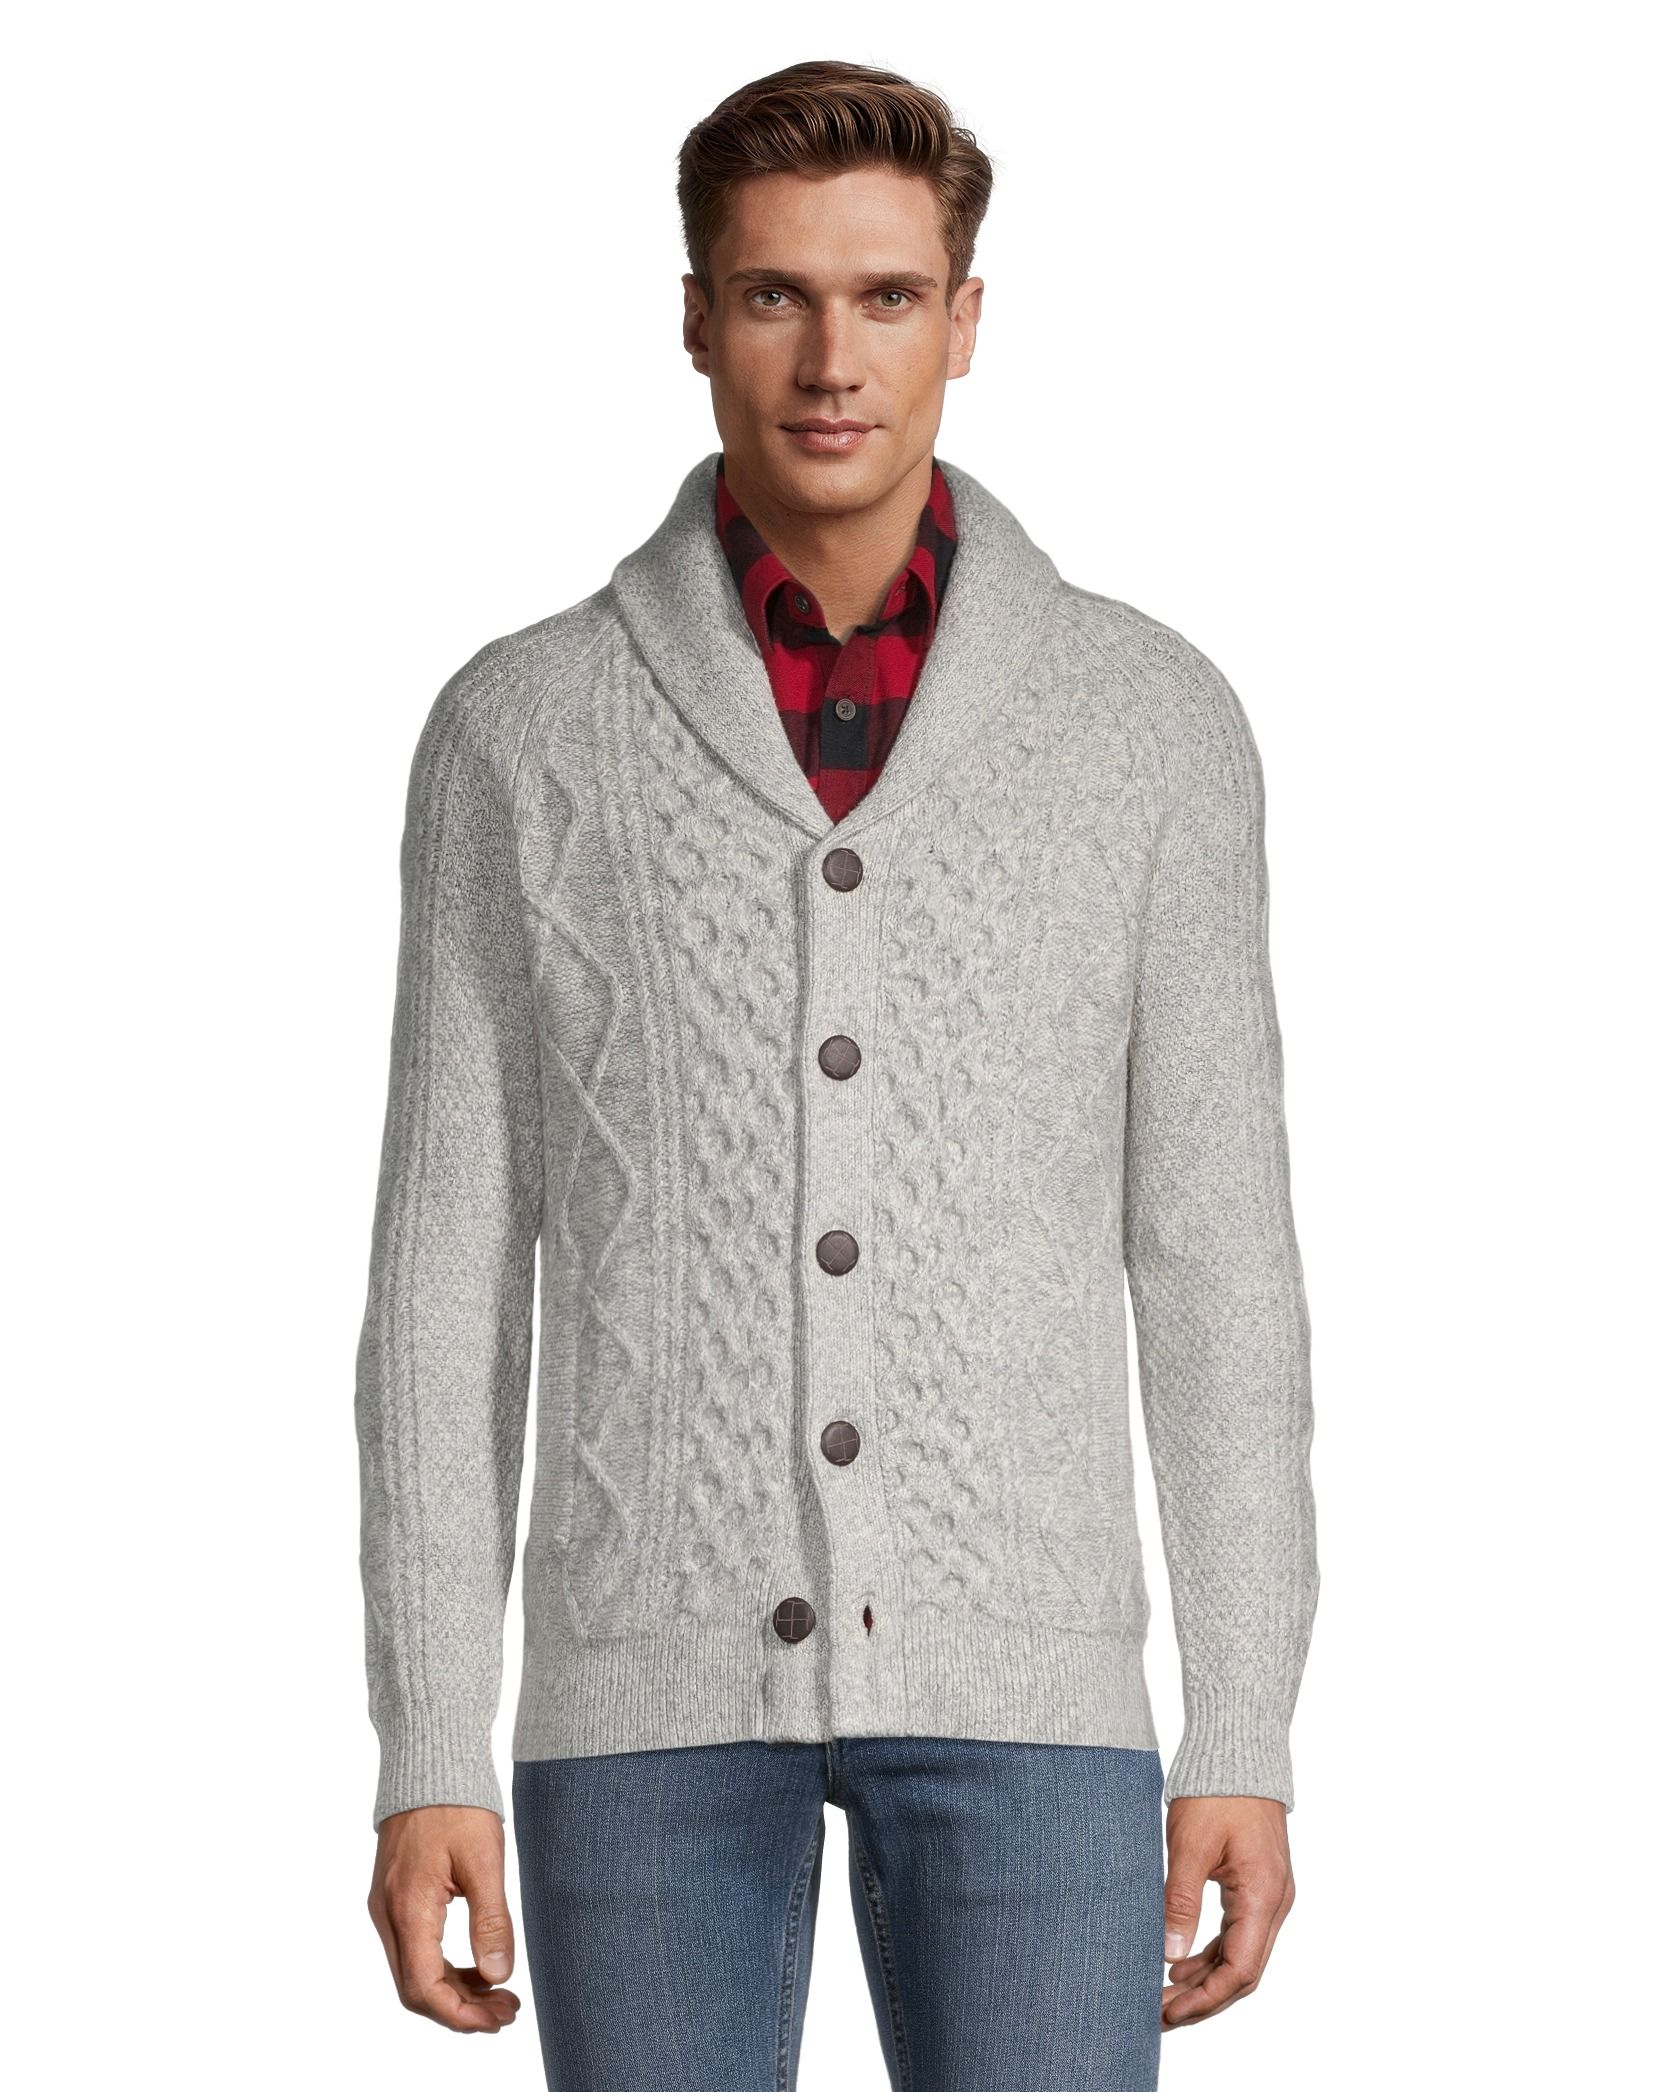 WindRiver Men's Heritage Cable Button Shawl Cardigan Sweater